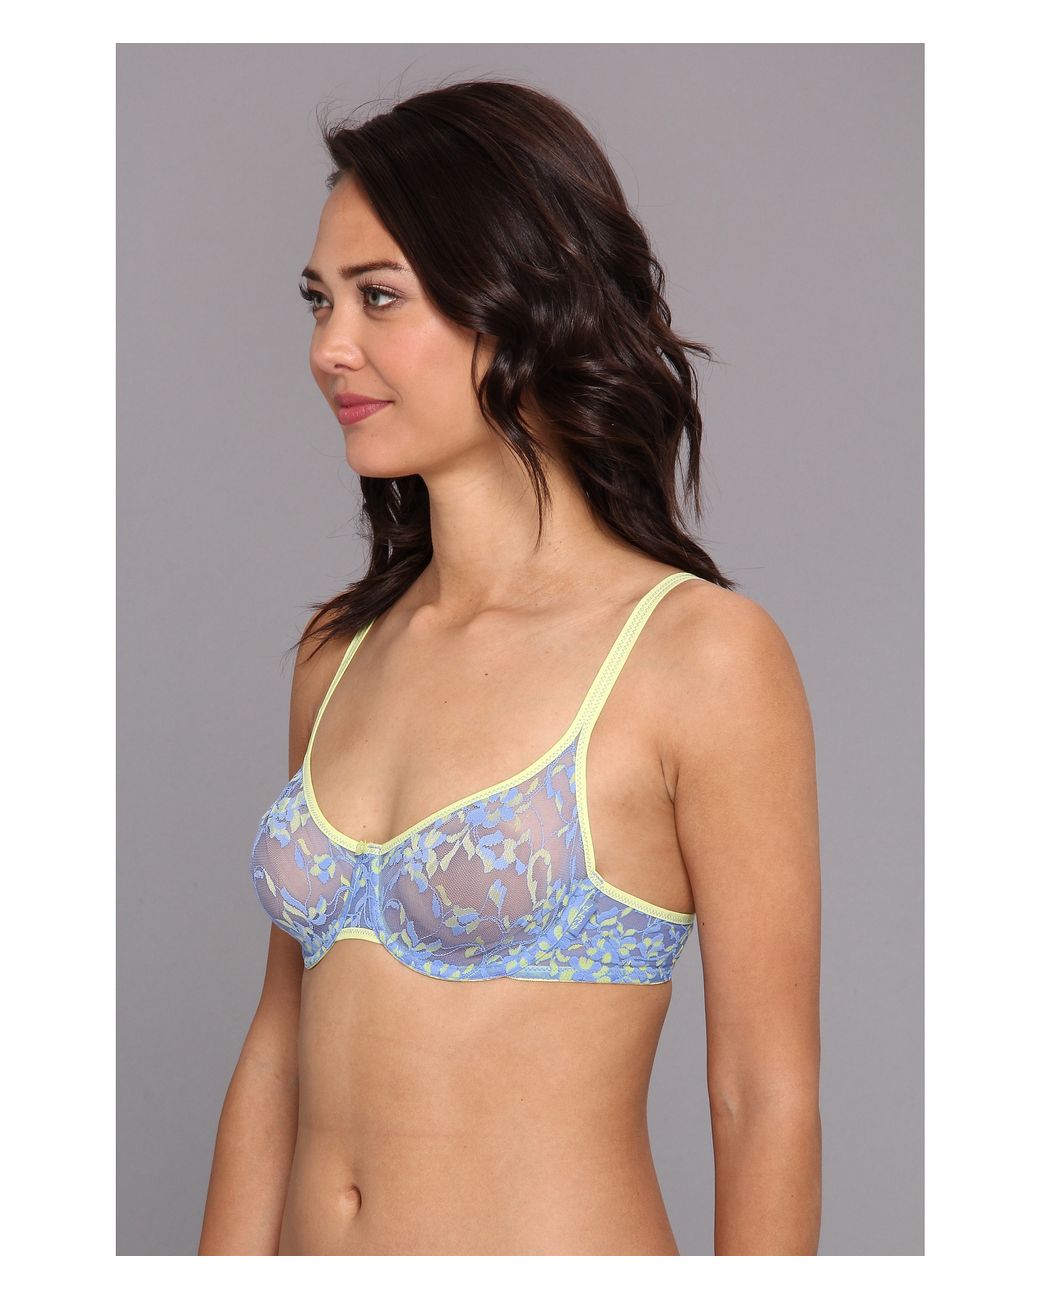 DKNY Signature Lace Unlined Demi Bra in Blue